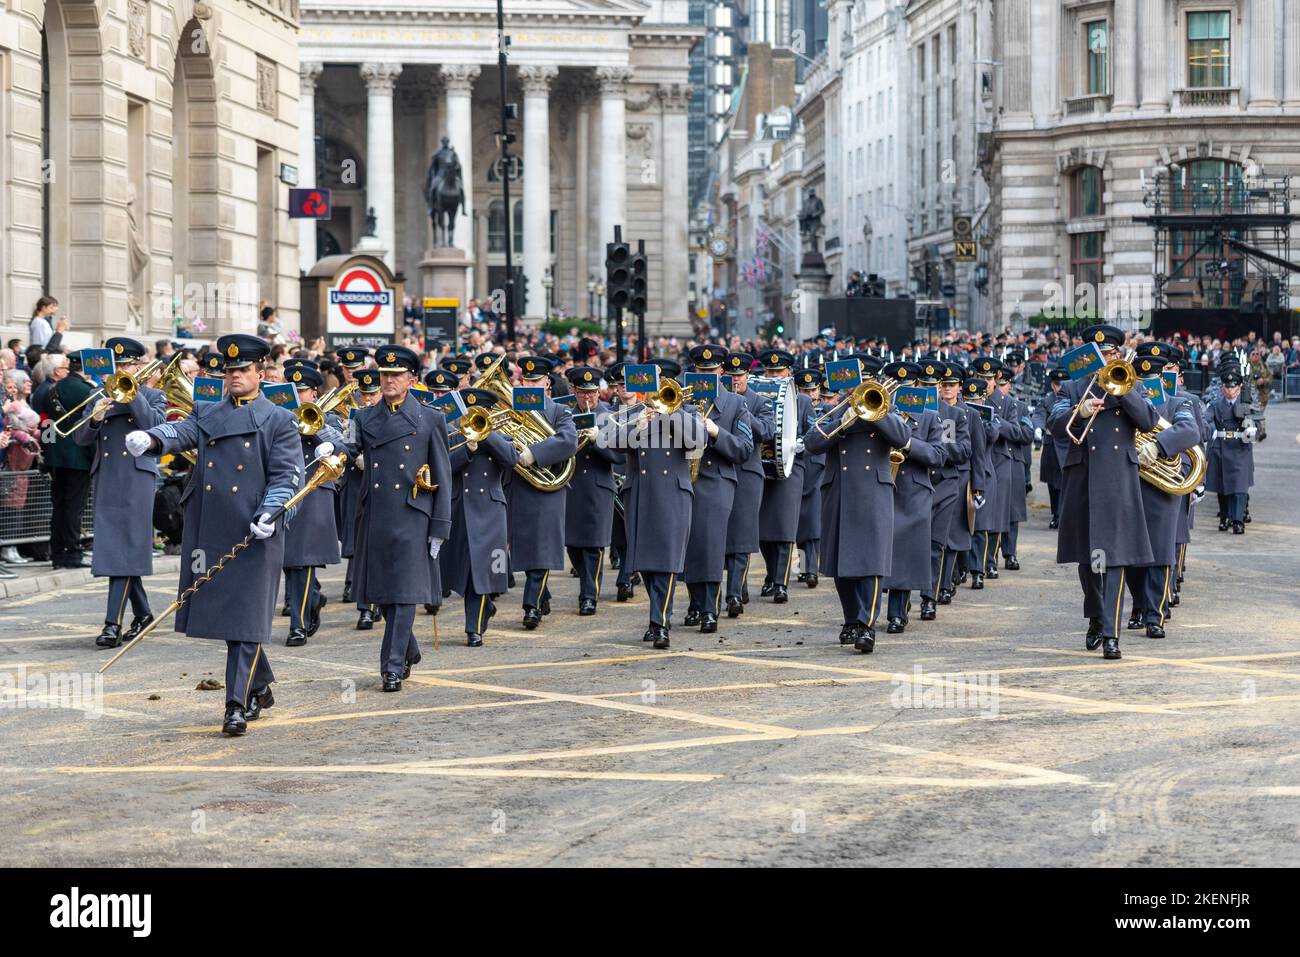 Royal Air Force Band at the Lord Mayor's Show parade in the City of London, UK Stock Photo